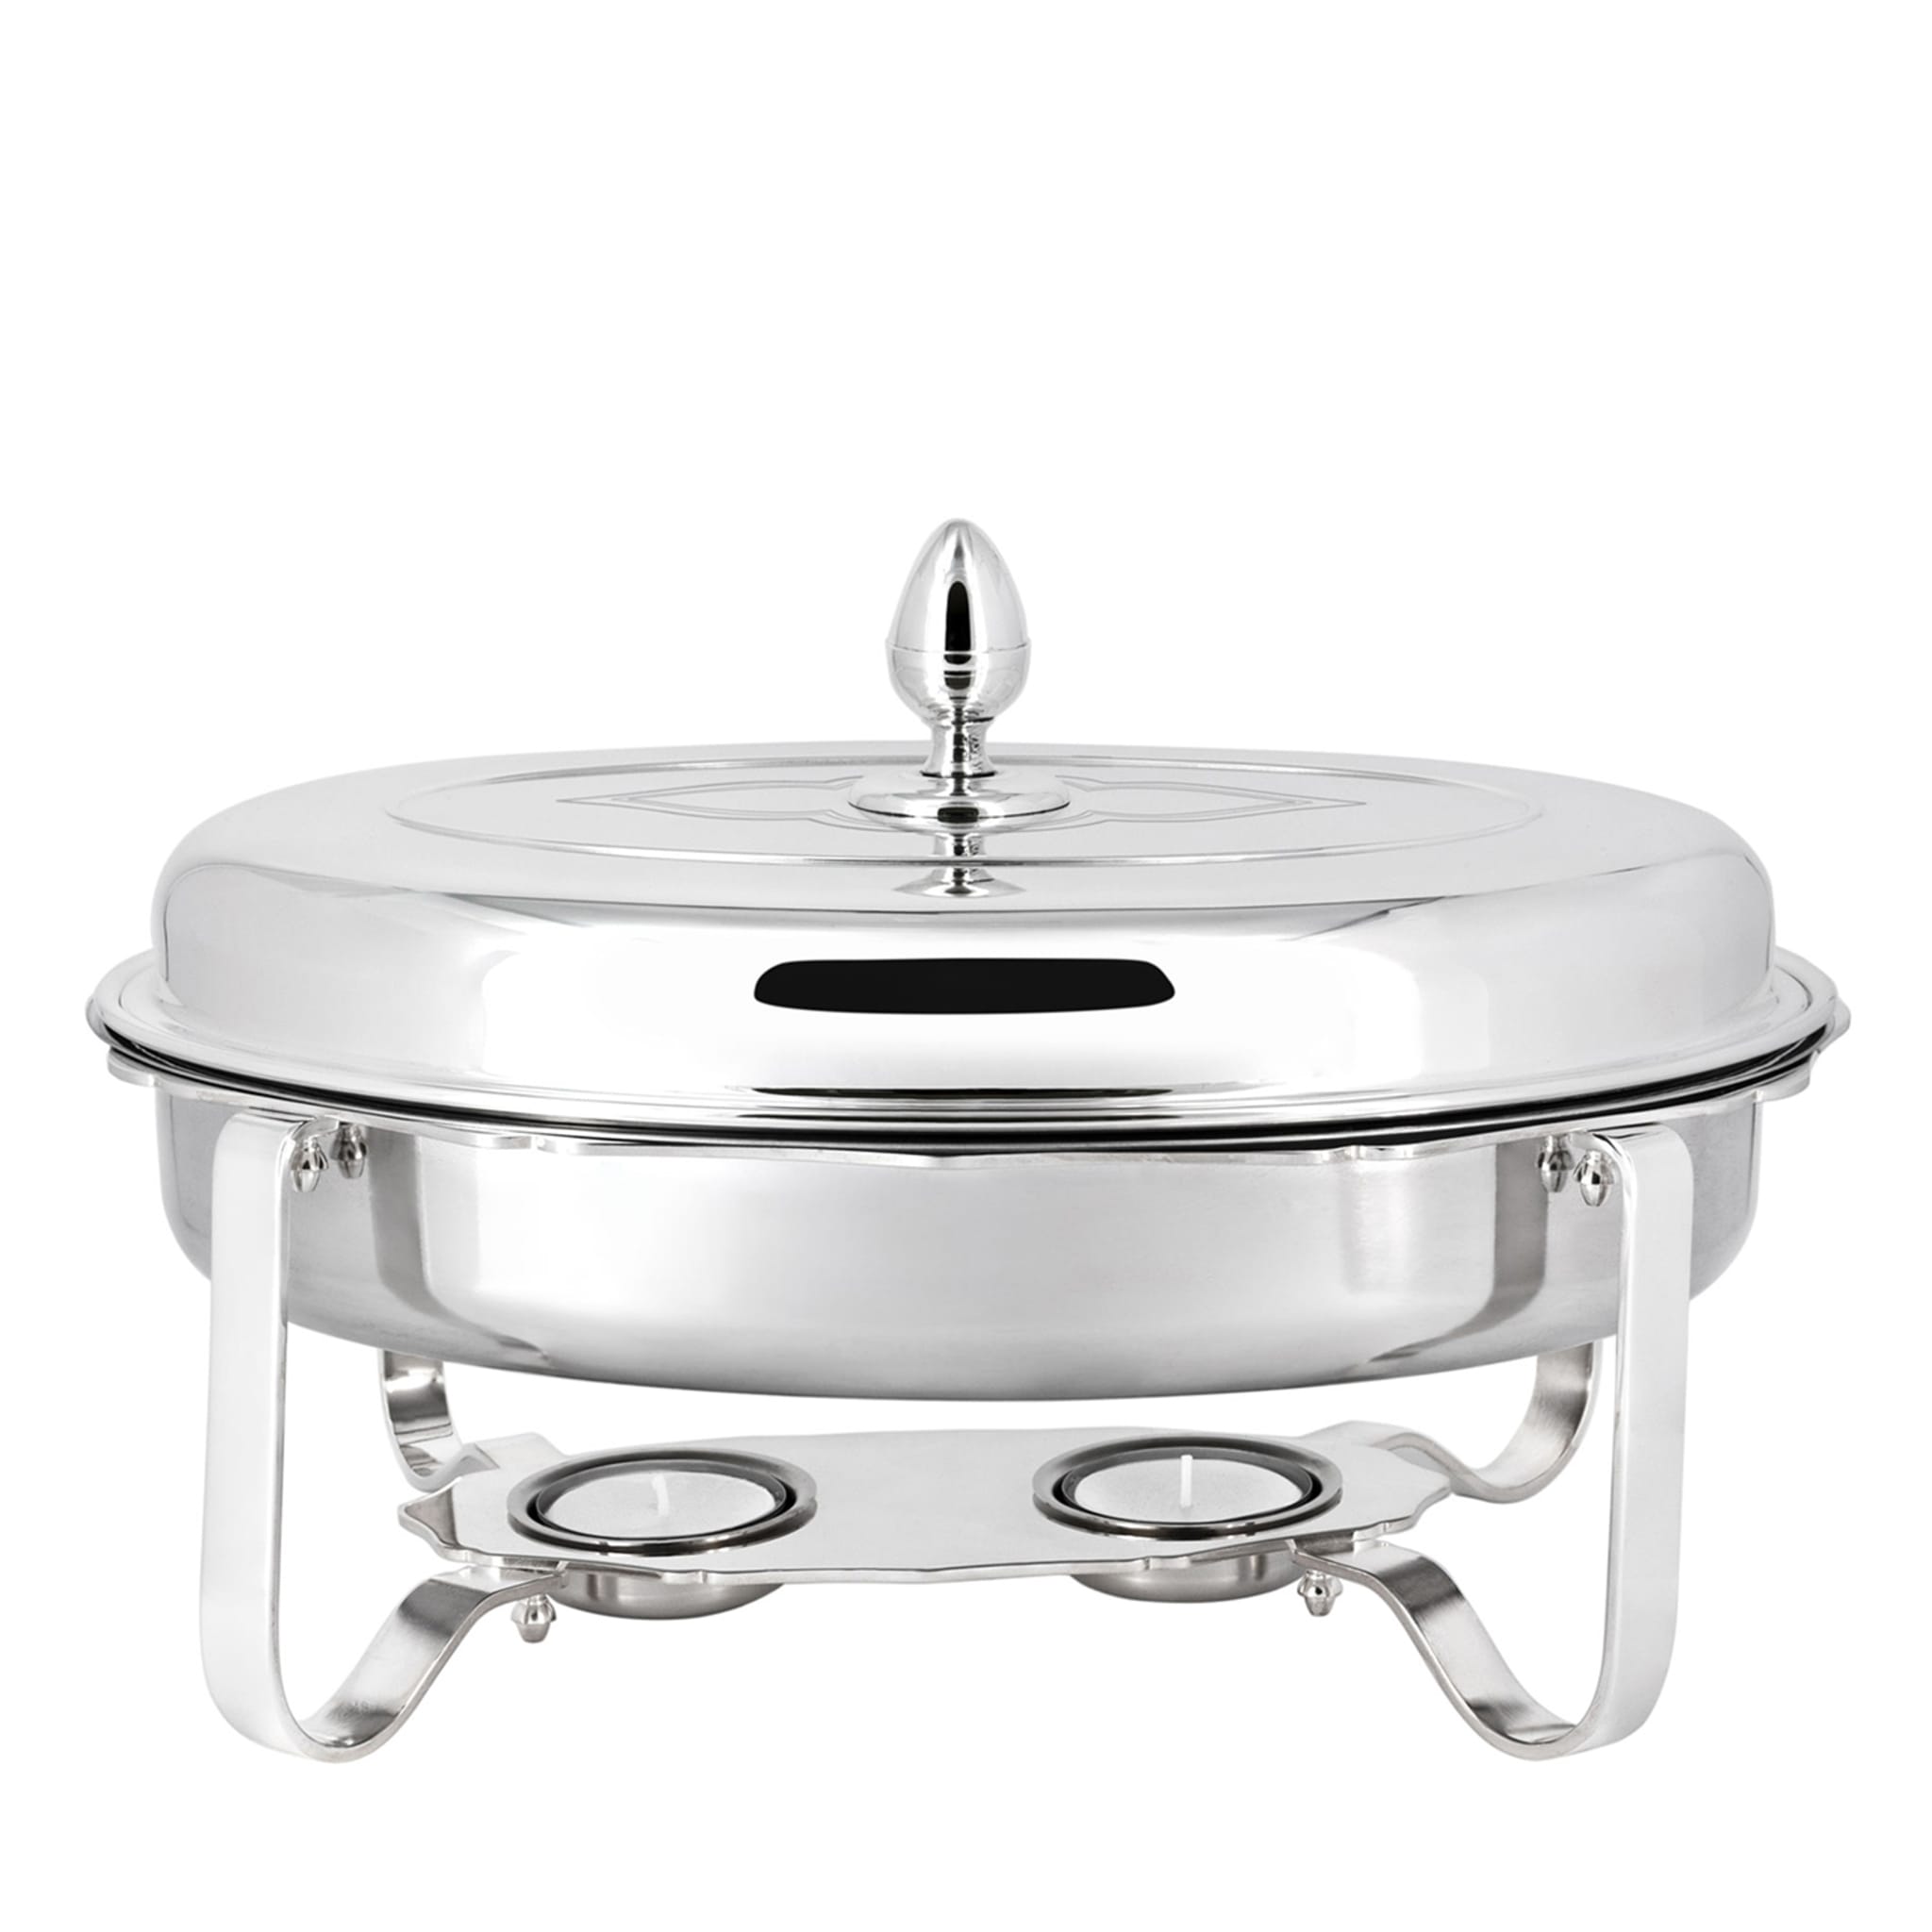 Oval Chafing Dish  - Main view